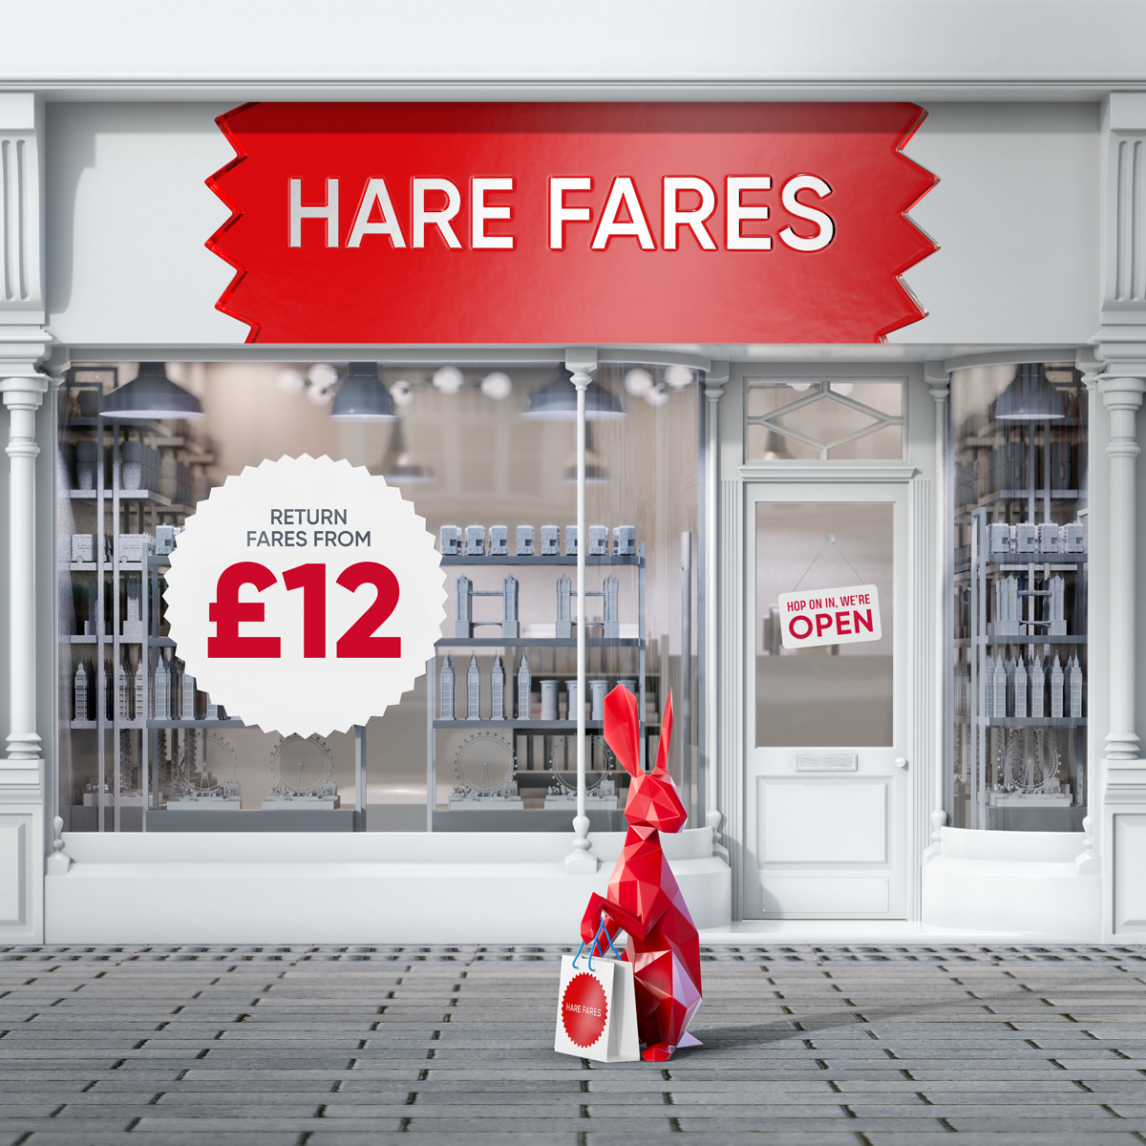 Hare Fares. Return fares from £12